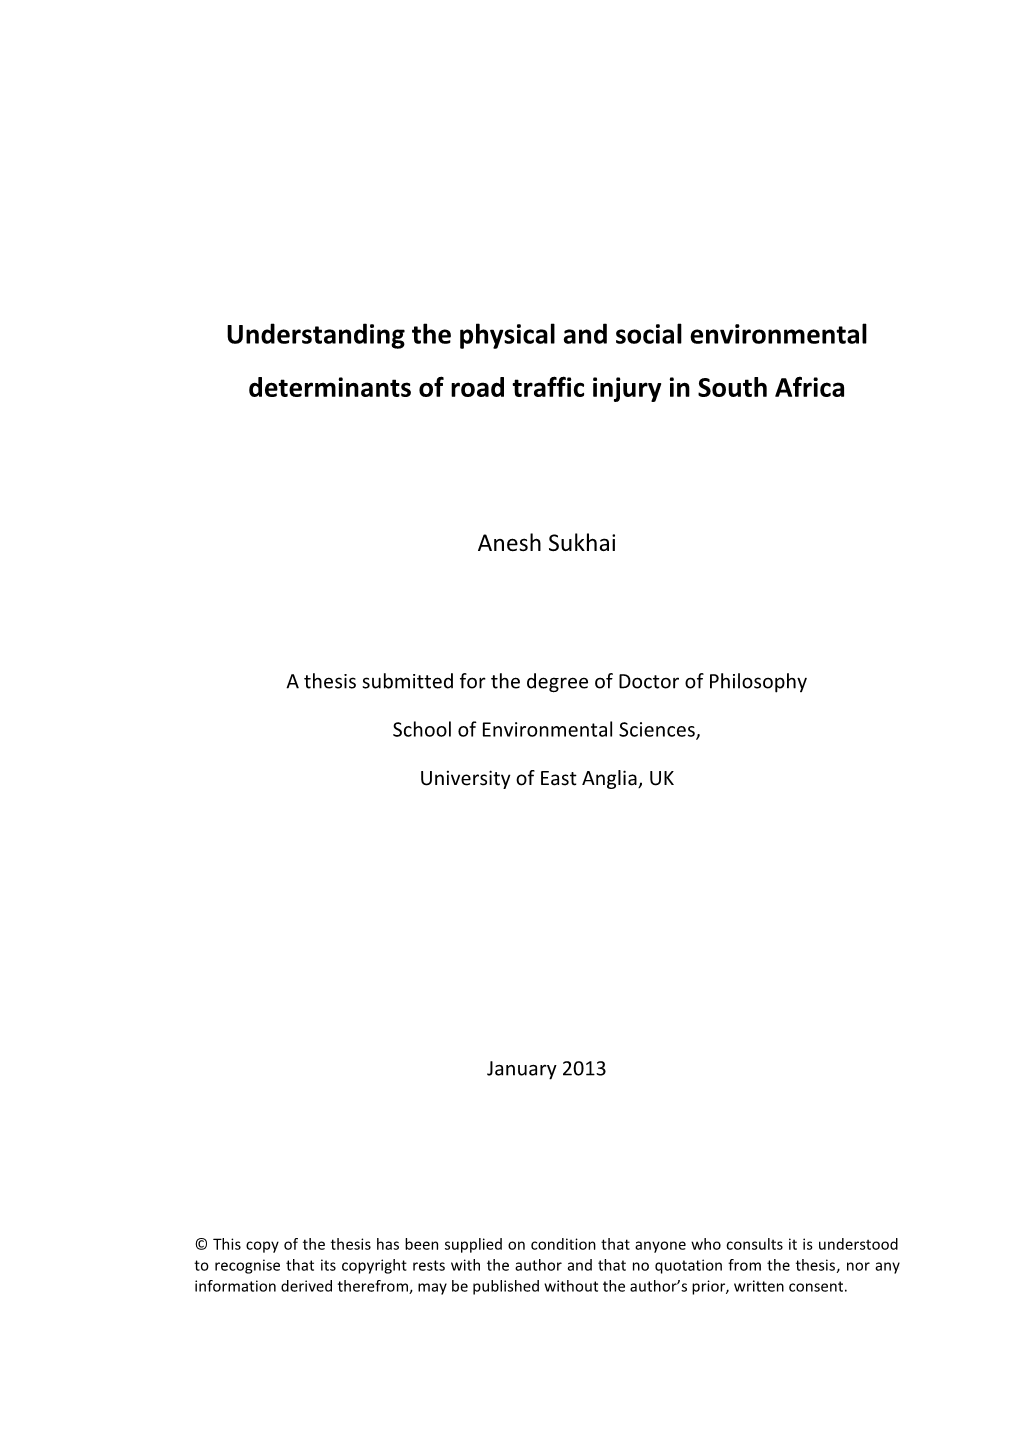 Understanding the Physical and Social Environmental Determinants of Road Traffic Injury in South Africa